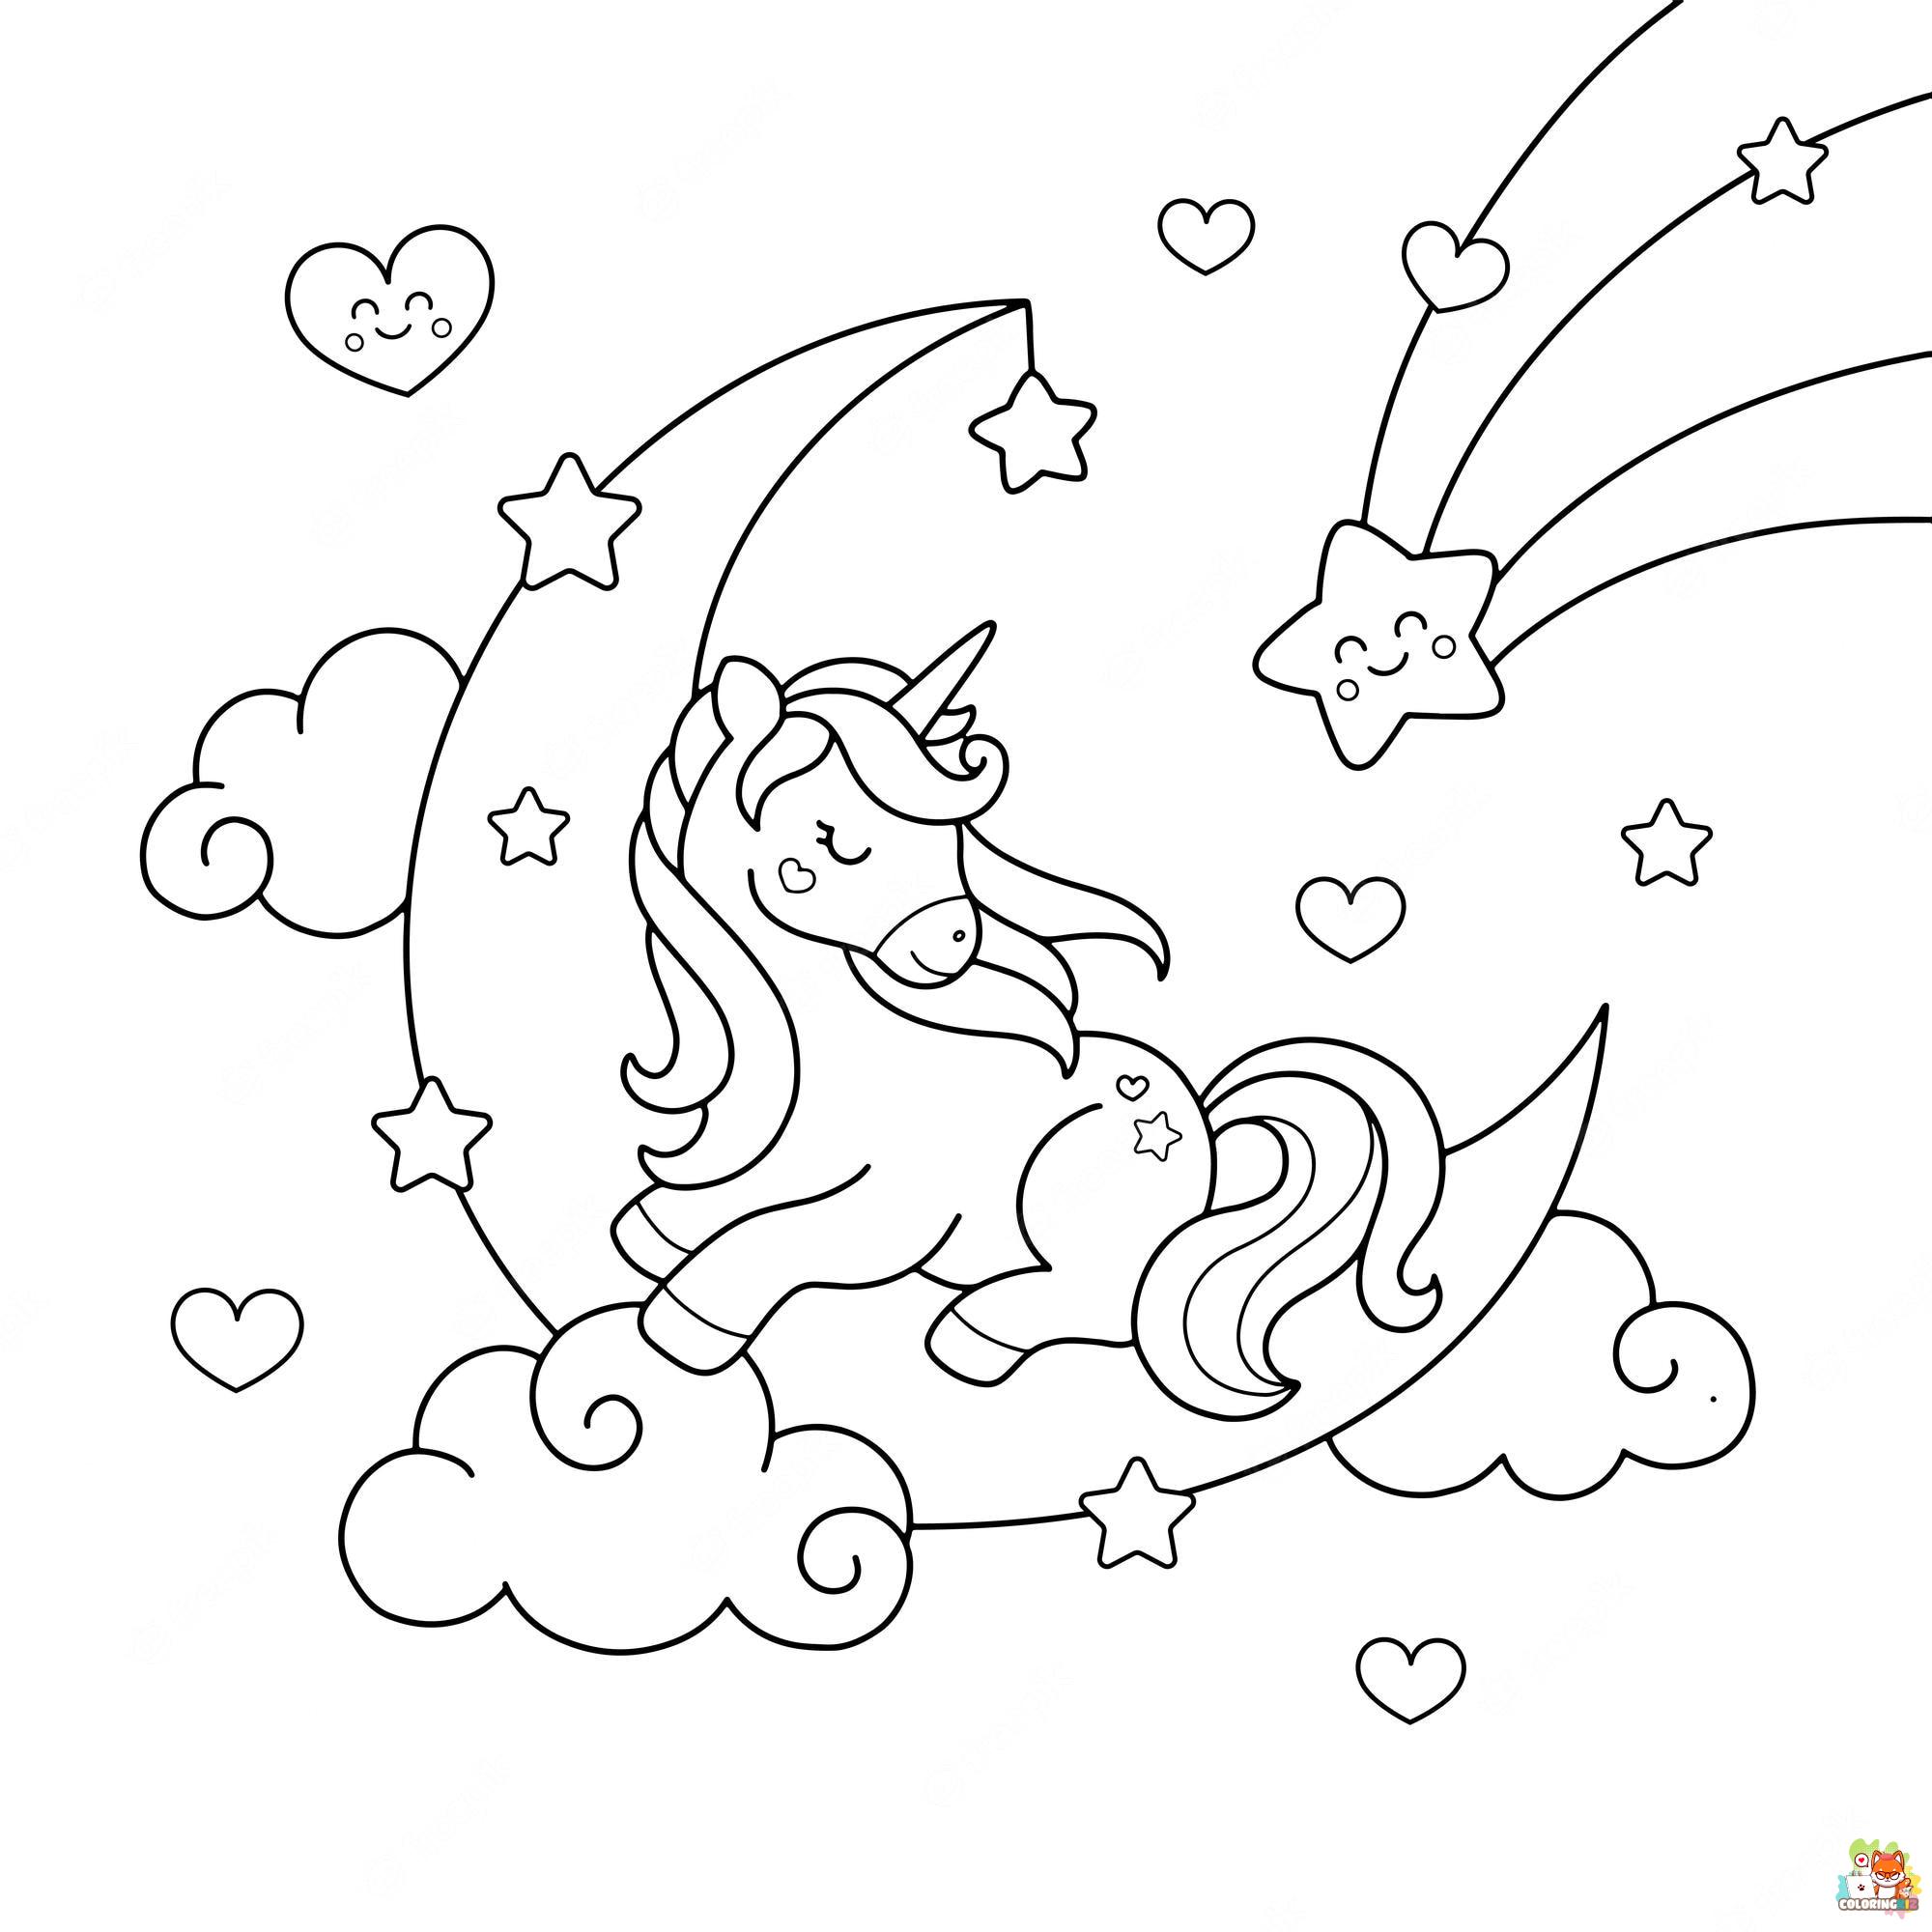 Unicorn Sleeping In The Cloud Coloring Pages 8